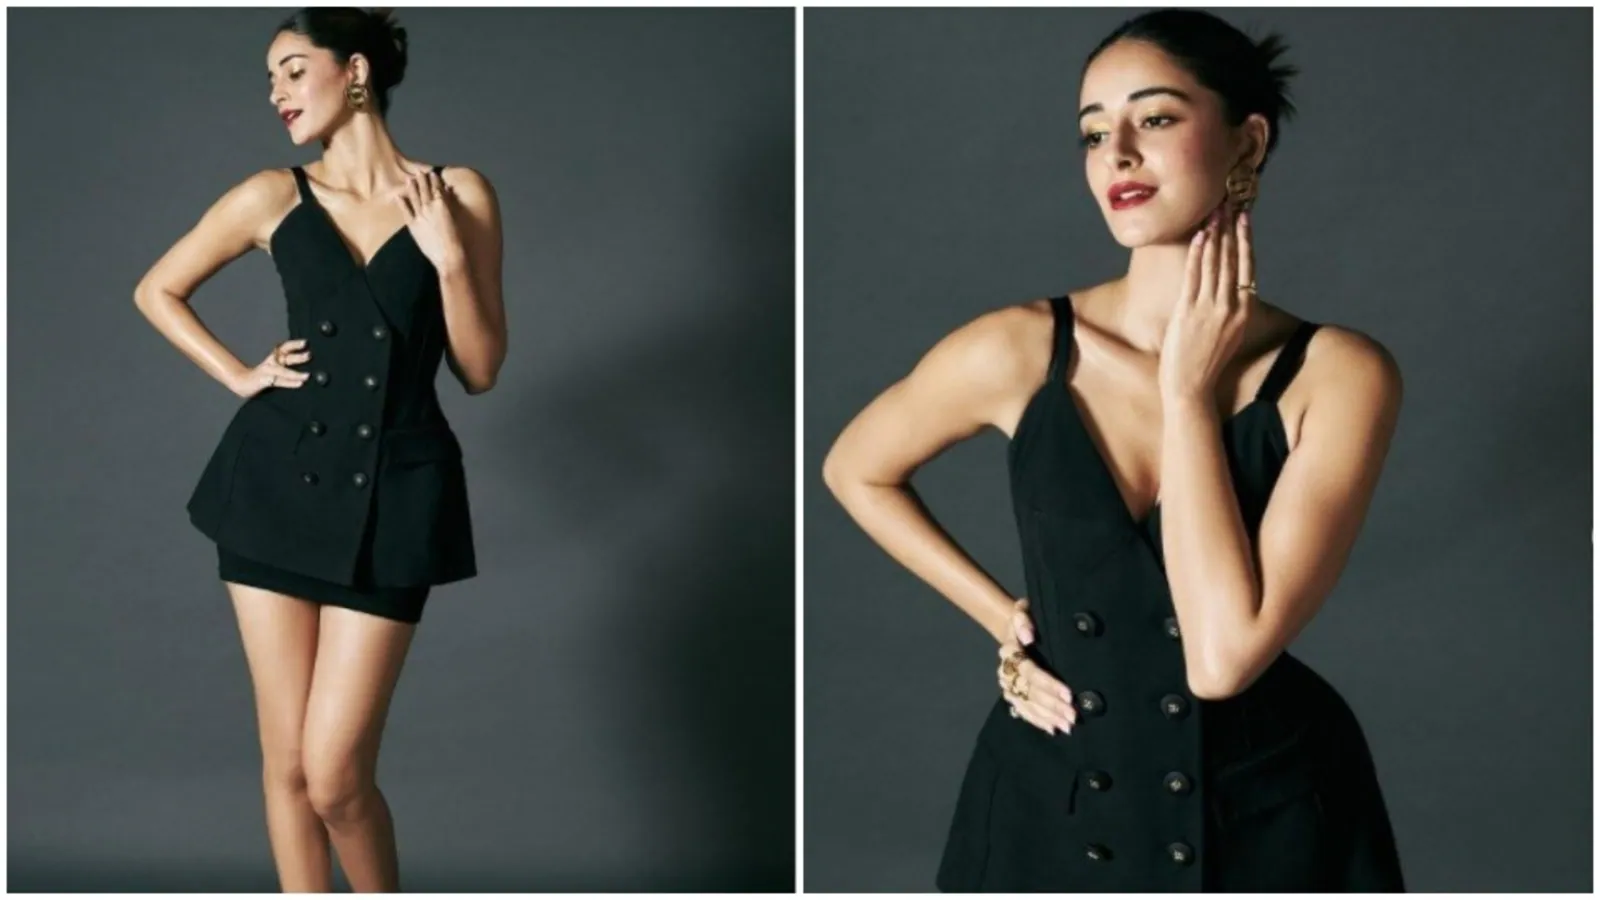 Ananya Panday, in a black co-ord formal set, means business